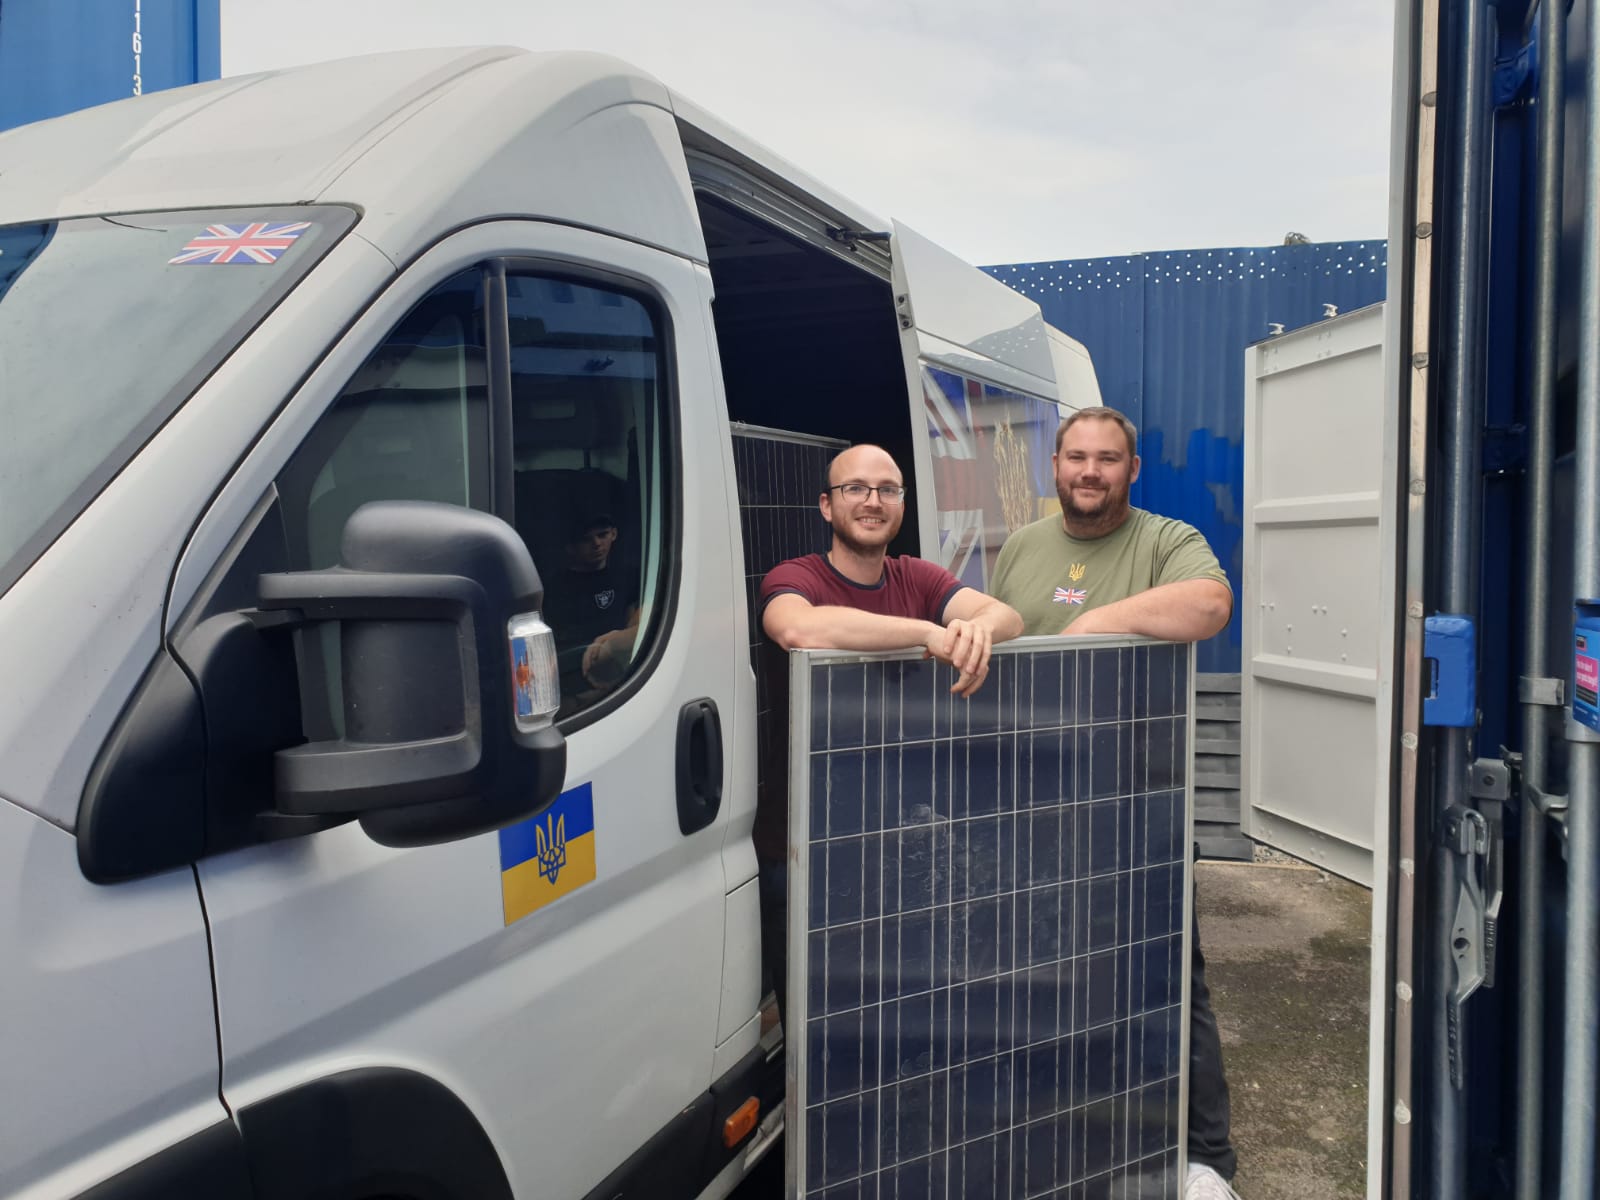 Charity UK Friends of Ukraine leave for Ivanika, where the solar panels will help power local homes and community buildings